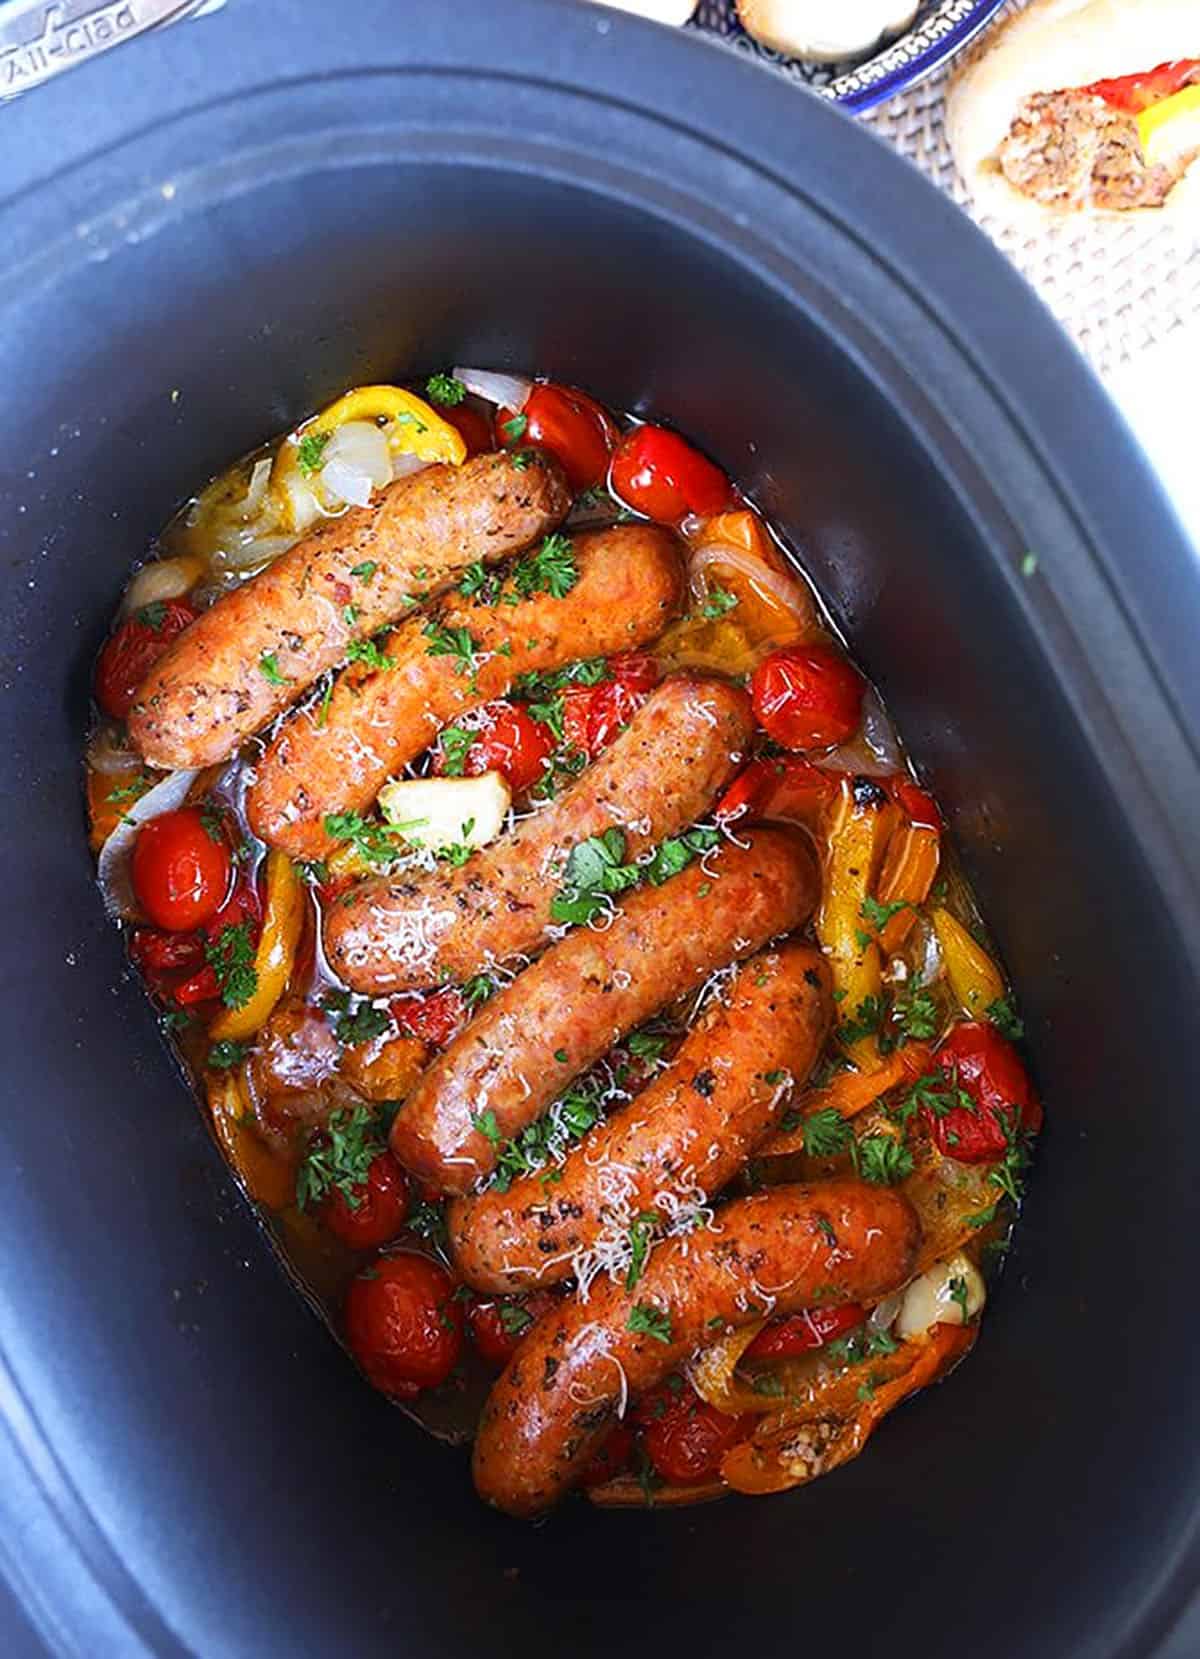 Italian sausage and peppers in a black cast iron crock pot.